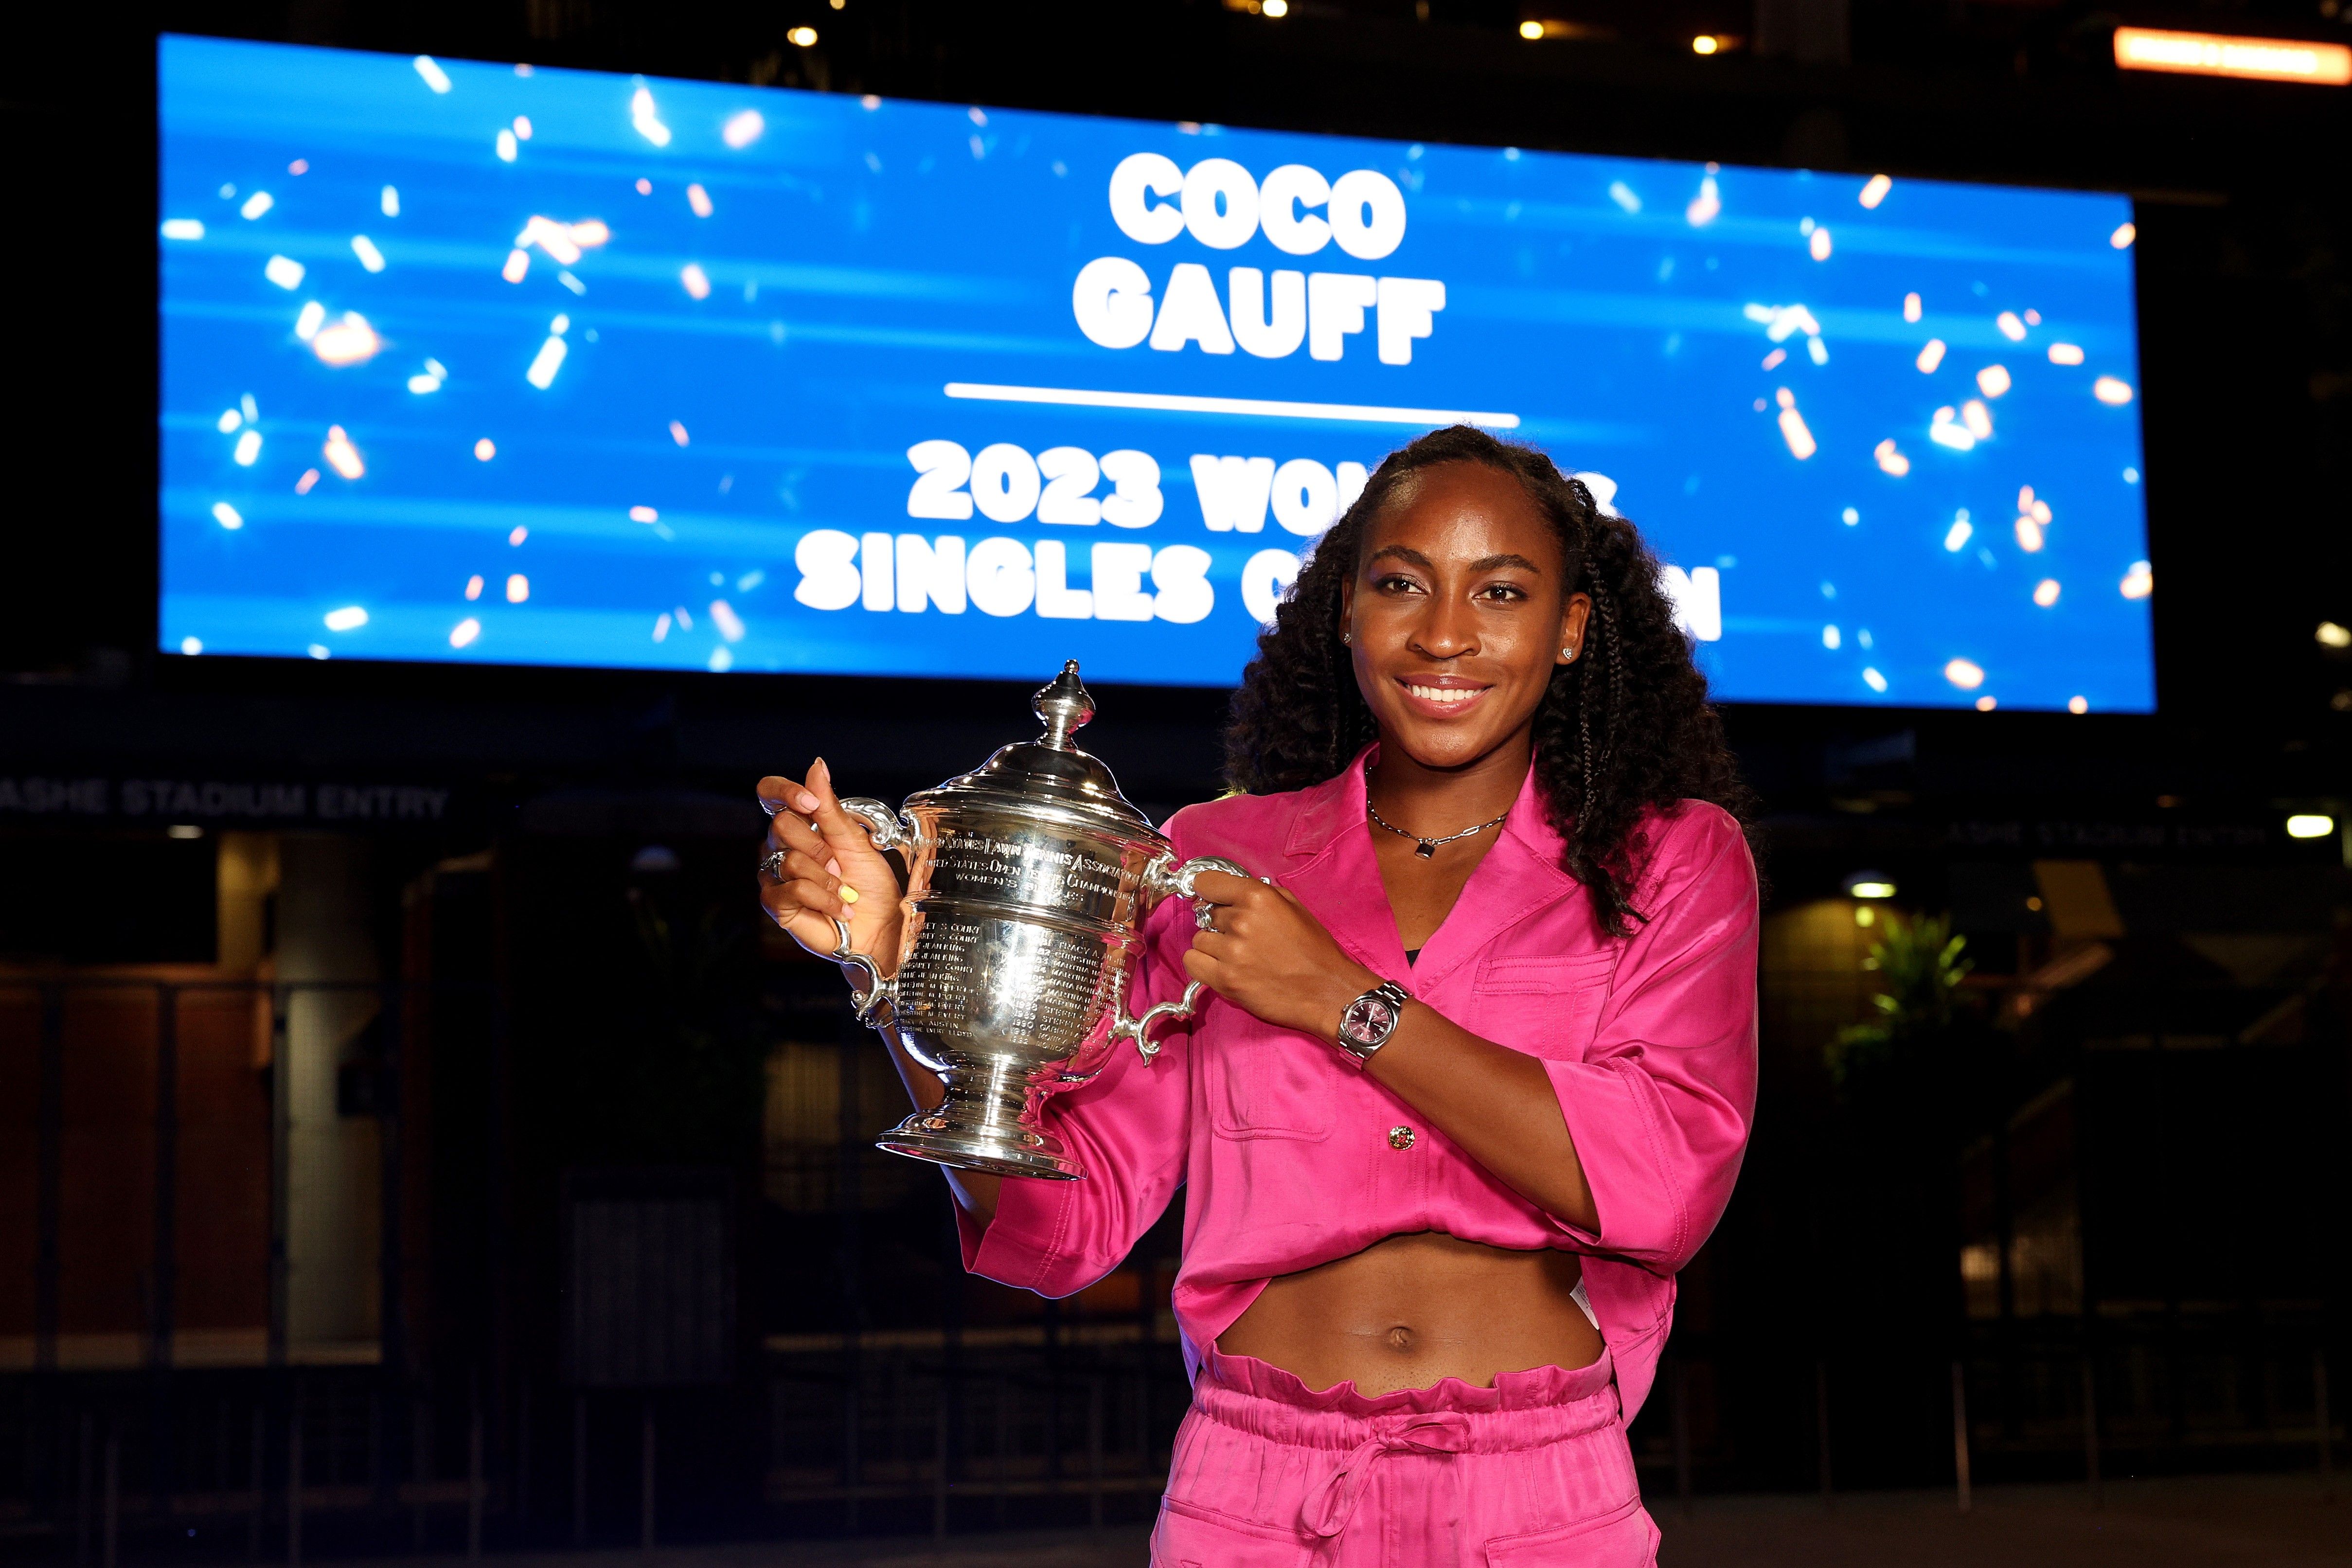 3 Things To Know About Coco Gauff, The 2023 US Open Winner photo